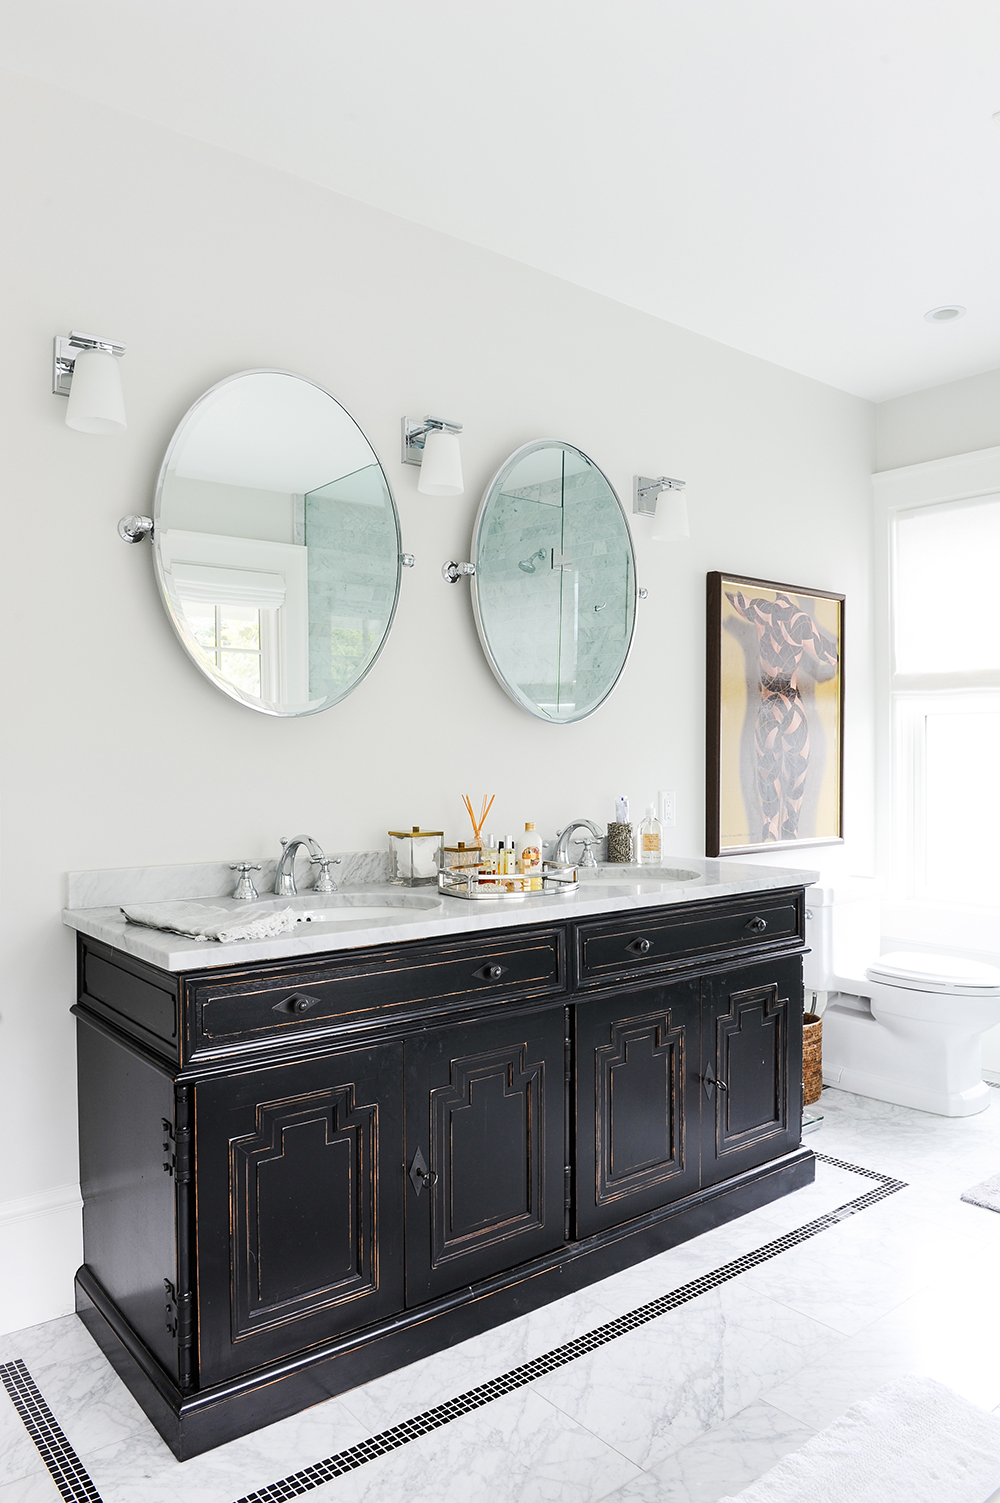 This master bathroom has modern elements yet still feels like a heritage home.